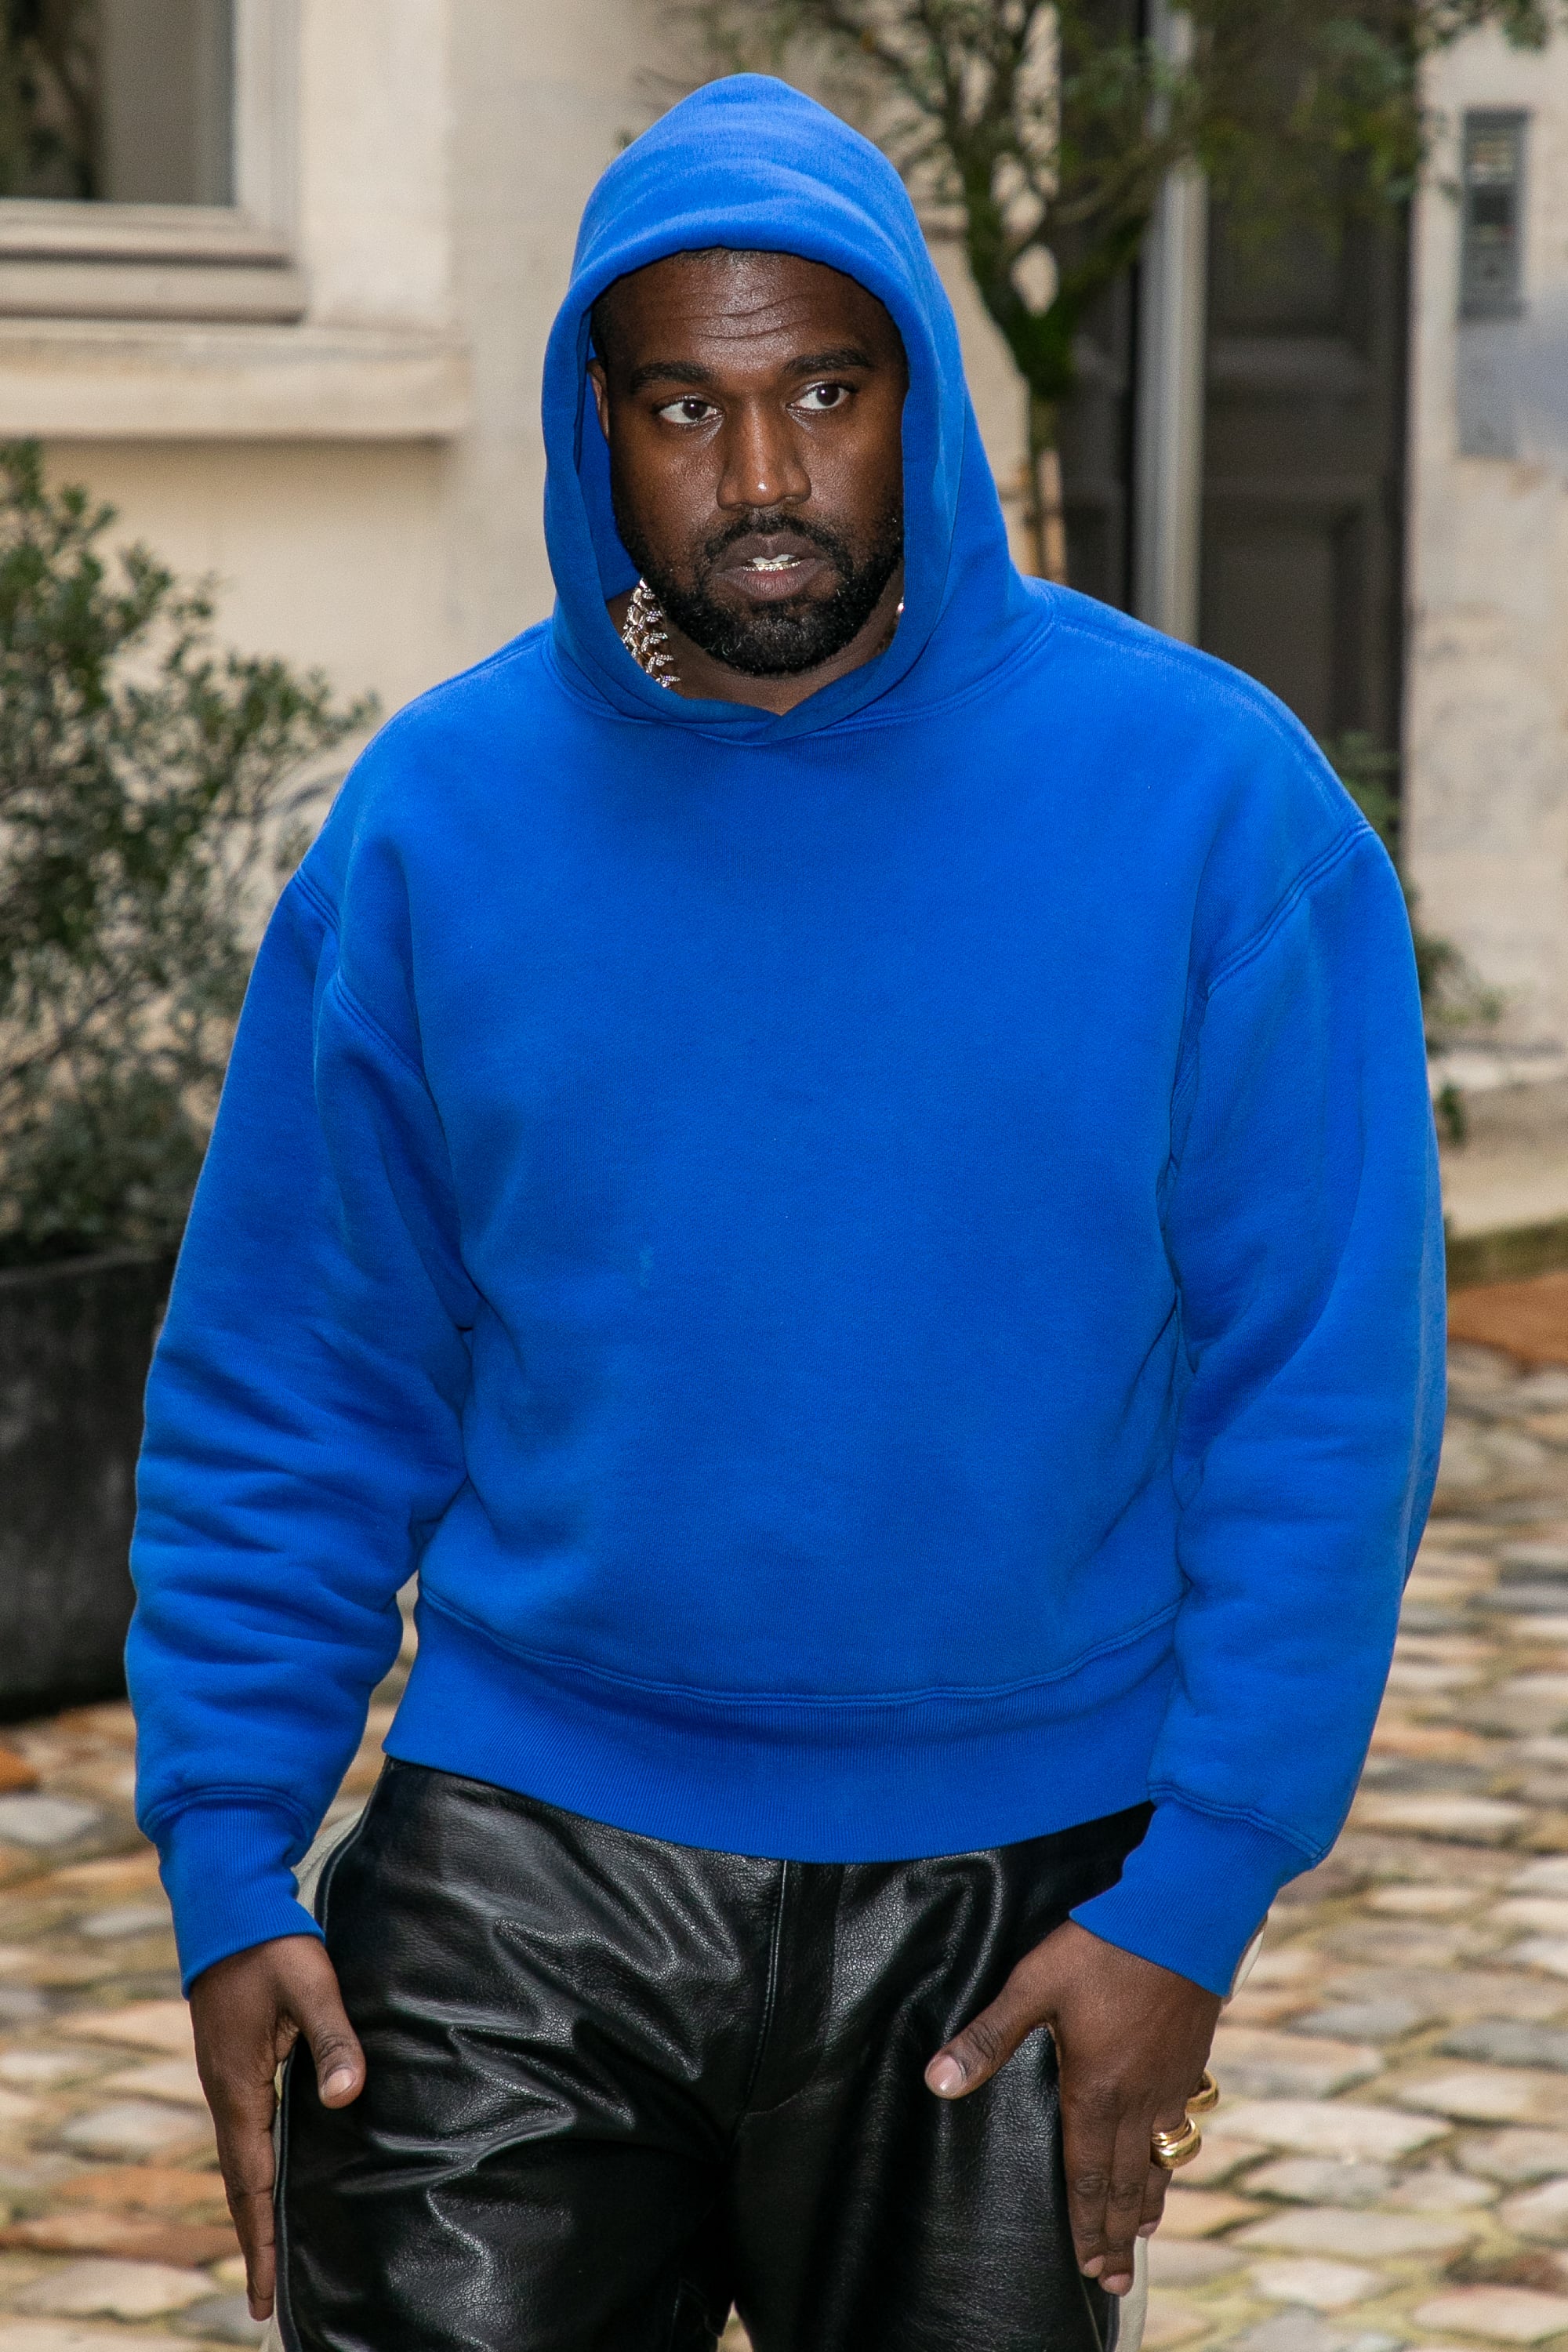 PARIS, FRANCE - MARCH 02: Kanye West is seen on March 02, 2020 in Paris, France. (Photo by Marc Piasecki/GC Images)